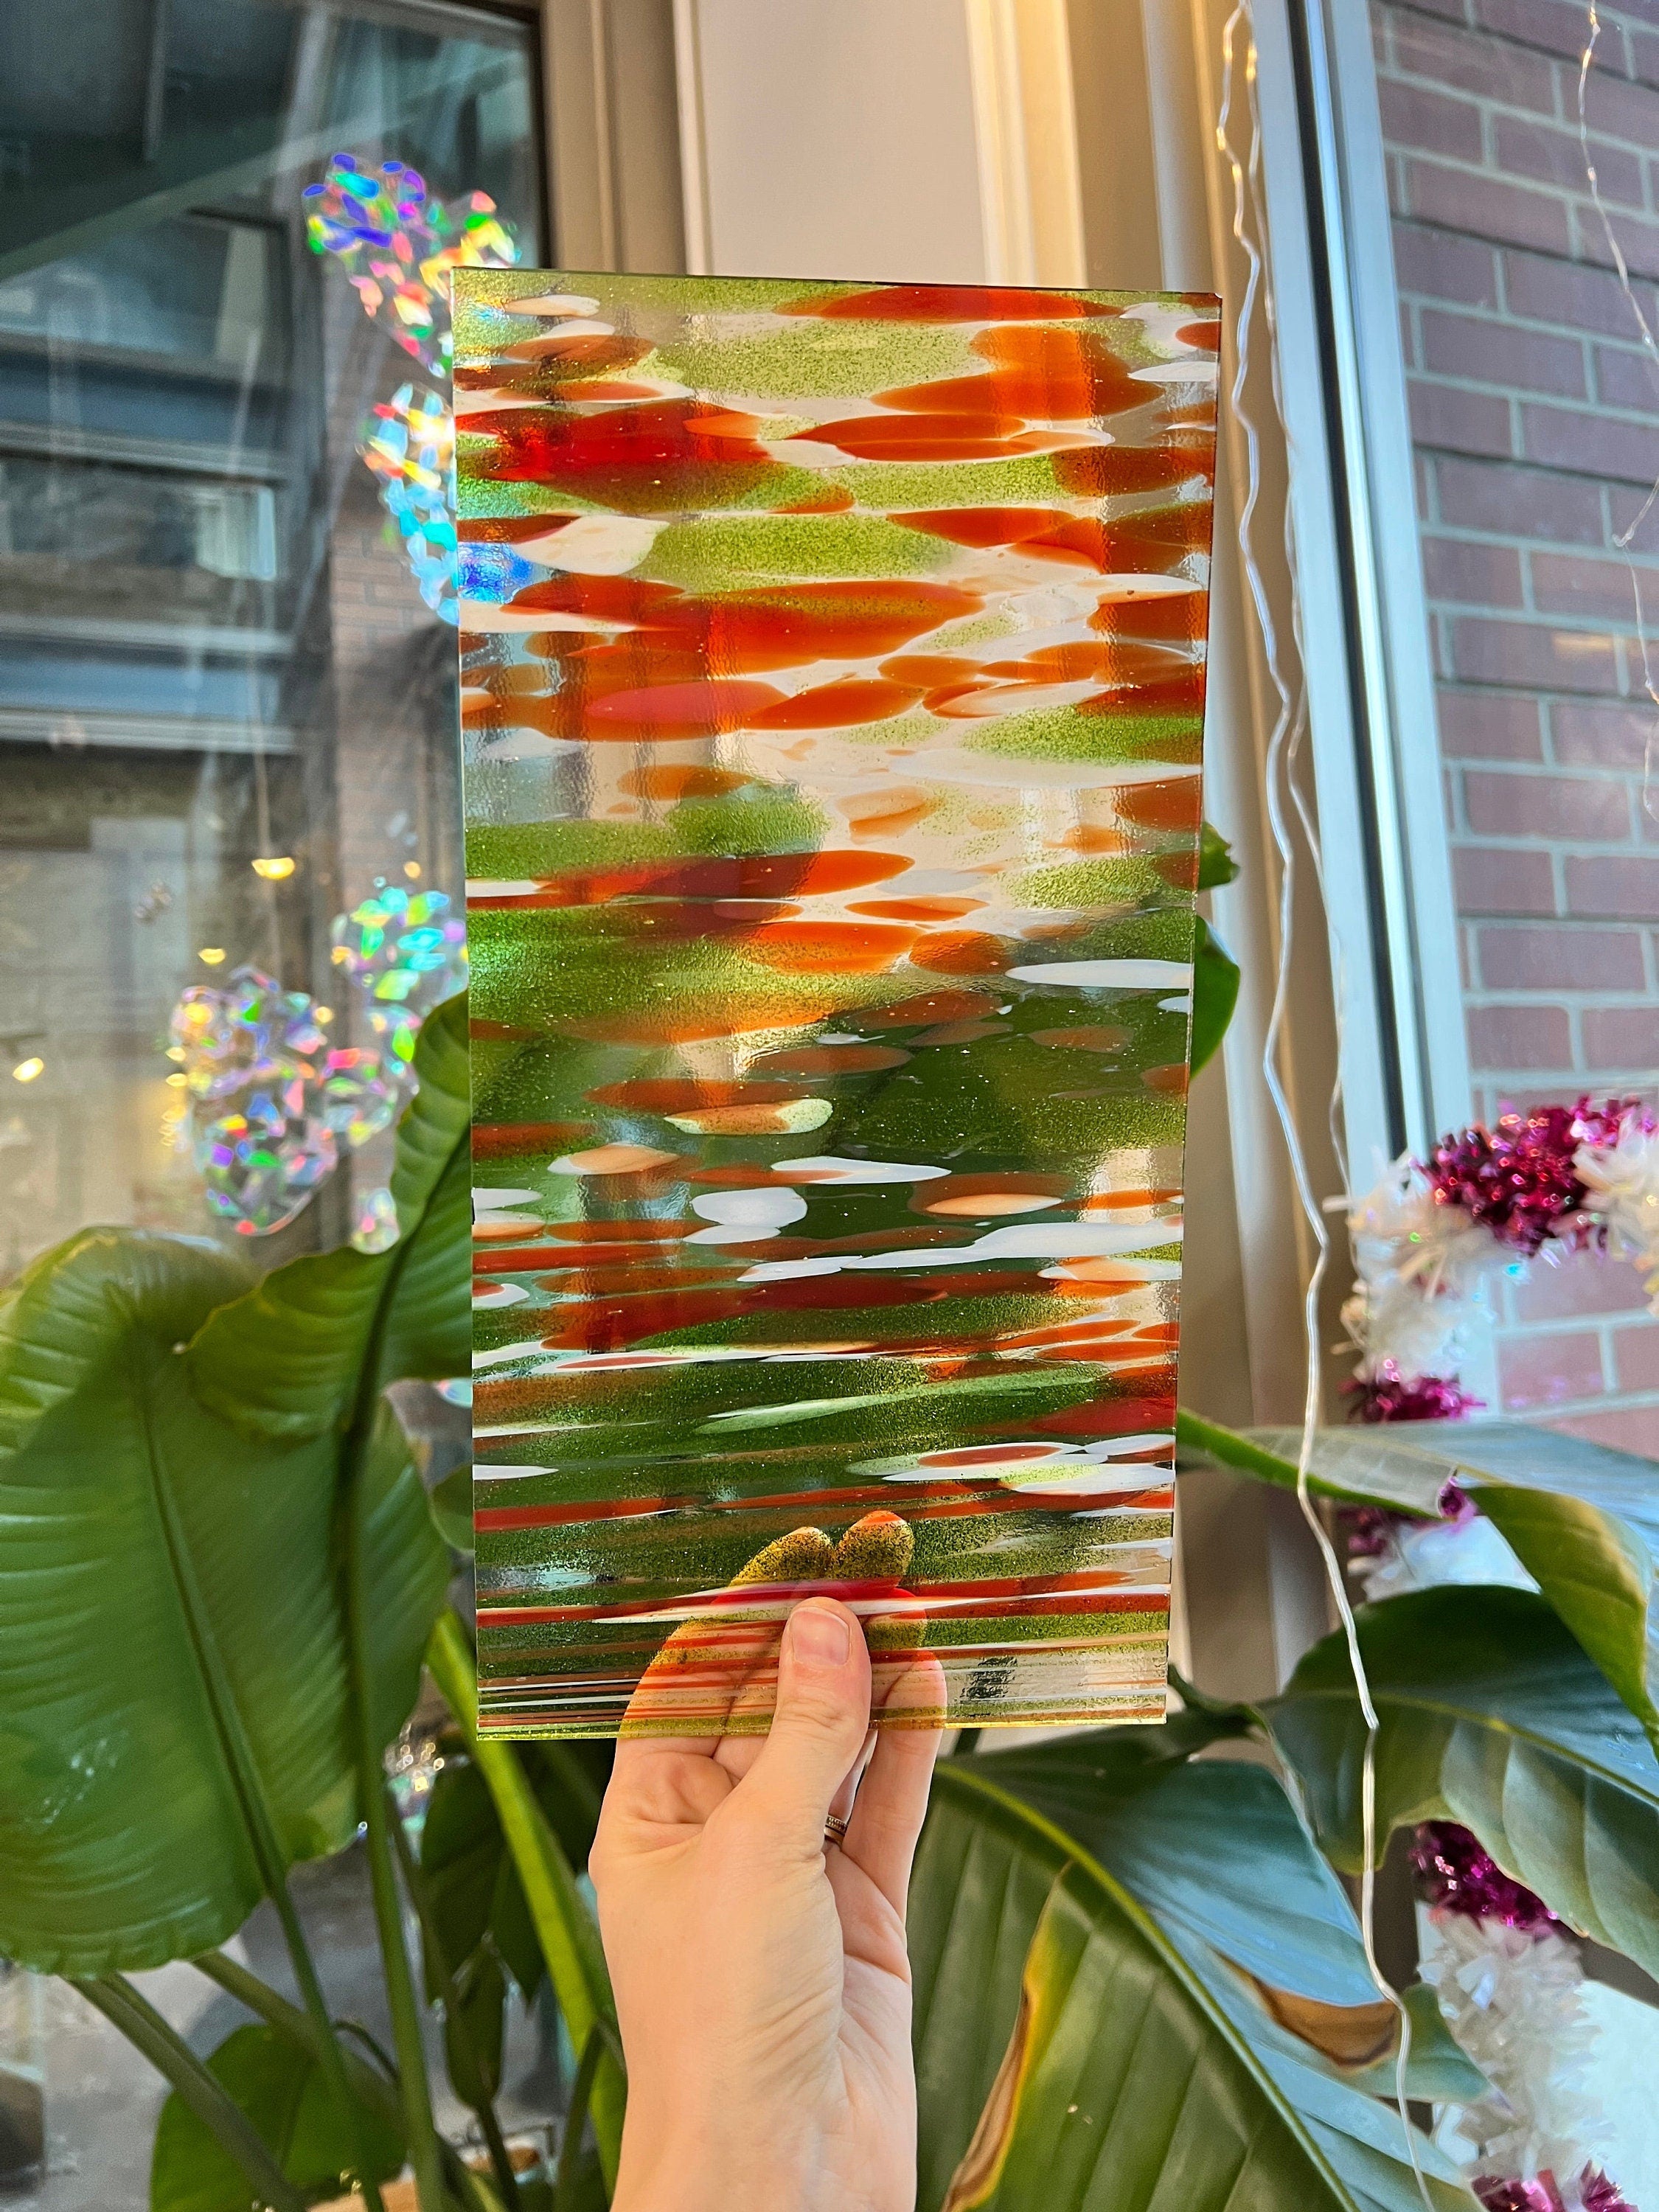 NEW! Holiday Fiesta Fuser's Reserve by Oceanside Sheet Glass Colorado Glassworks 12x6in  